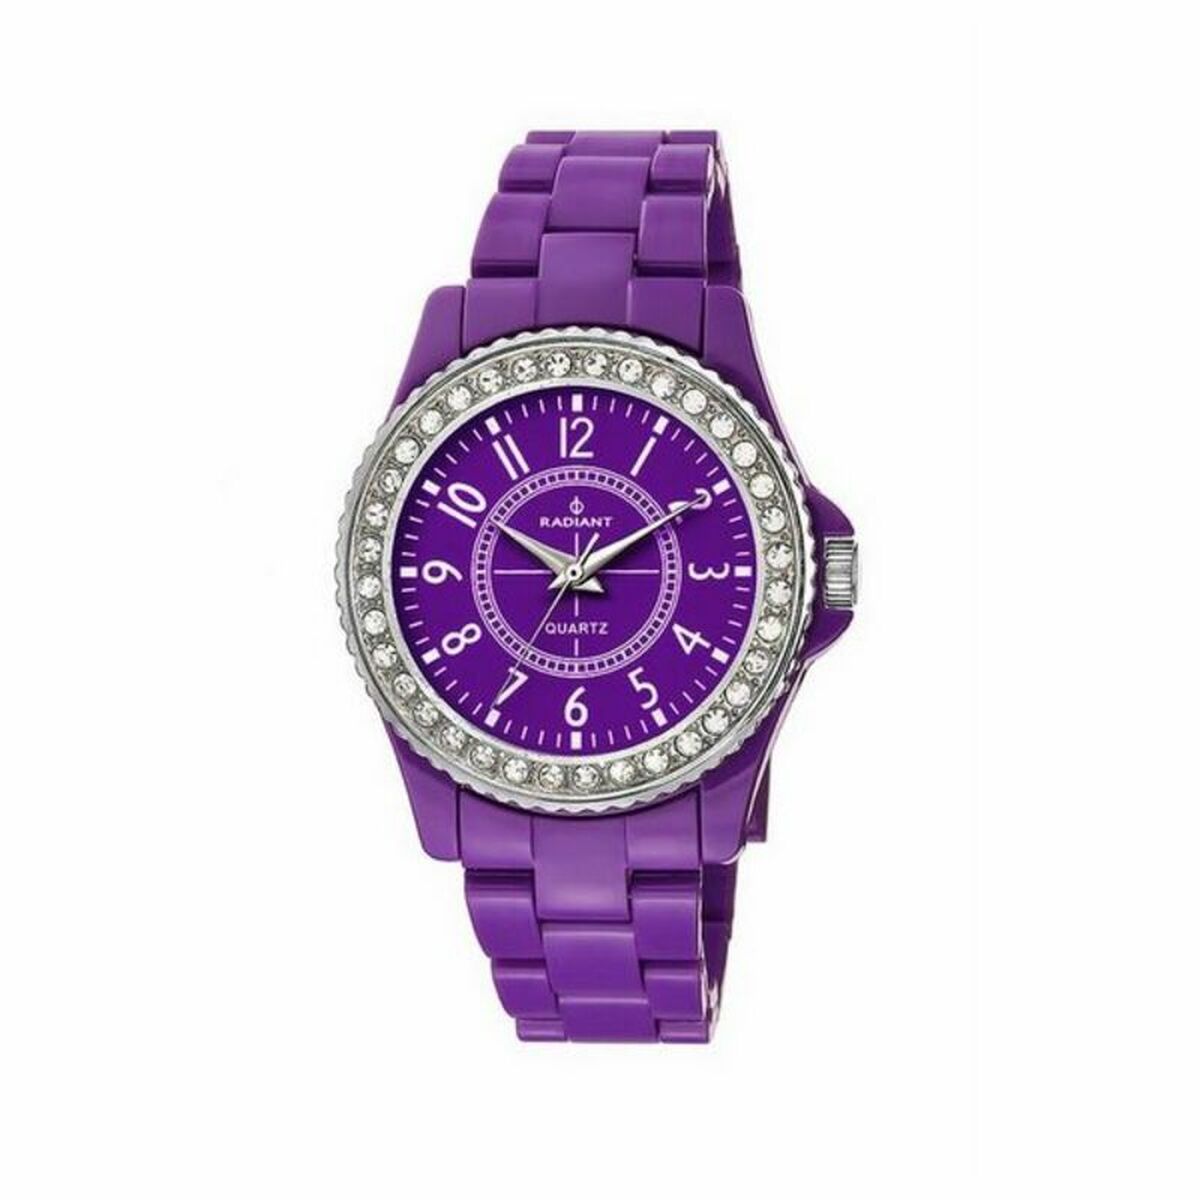 Ladies'Watch Radiant RA182204 (Ø 38 mm), Radiant, Watches, Women, ladieswatch-radiant-ra182204-o-38-mm, : Quartz Movement, Brand_Radiant, category-reference-2570, category-reference-2635, category-reference-2995, category-reference-t-19667, category-reference-t-19725, Condition_NEW, fashion, gifts for women, original gifts, Price_20 - 50, RiotNook